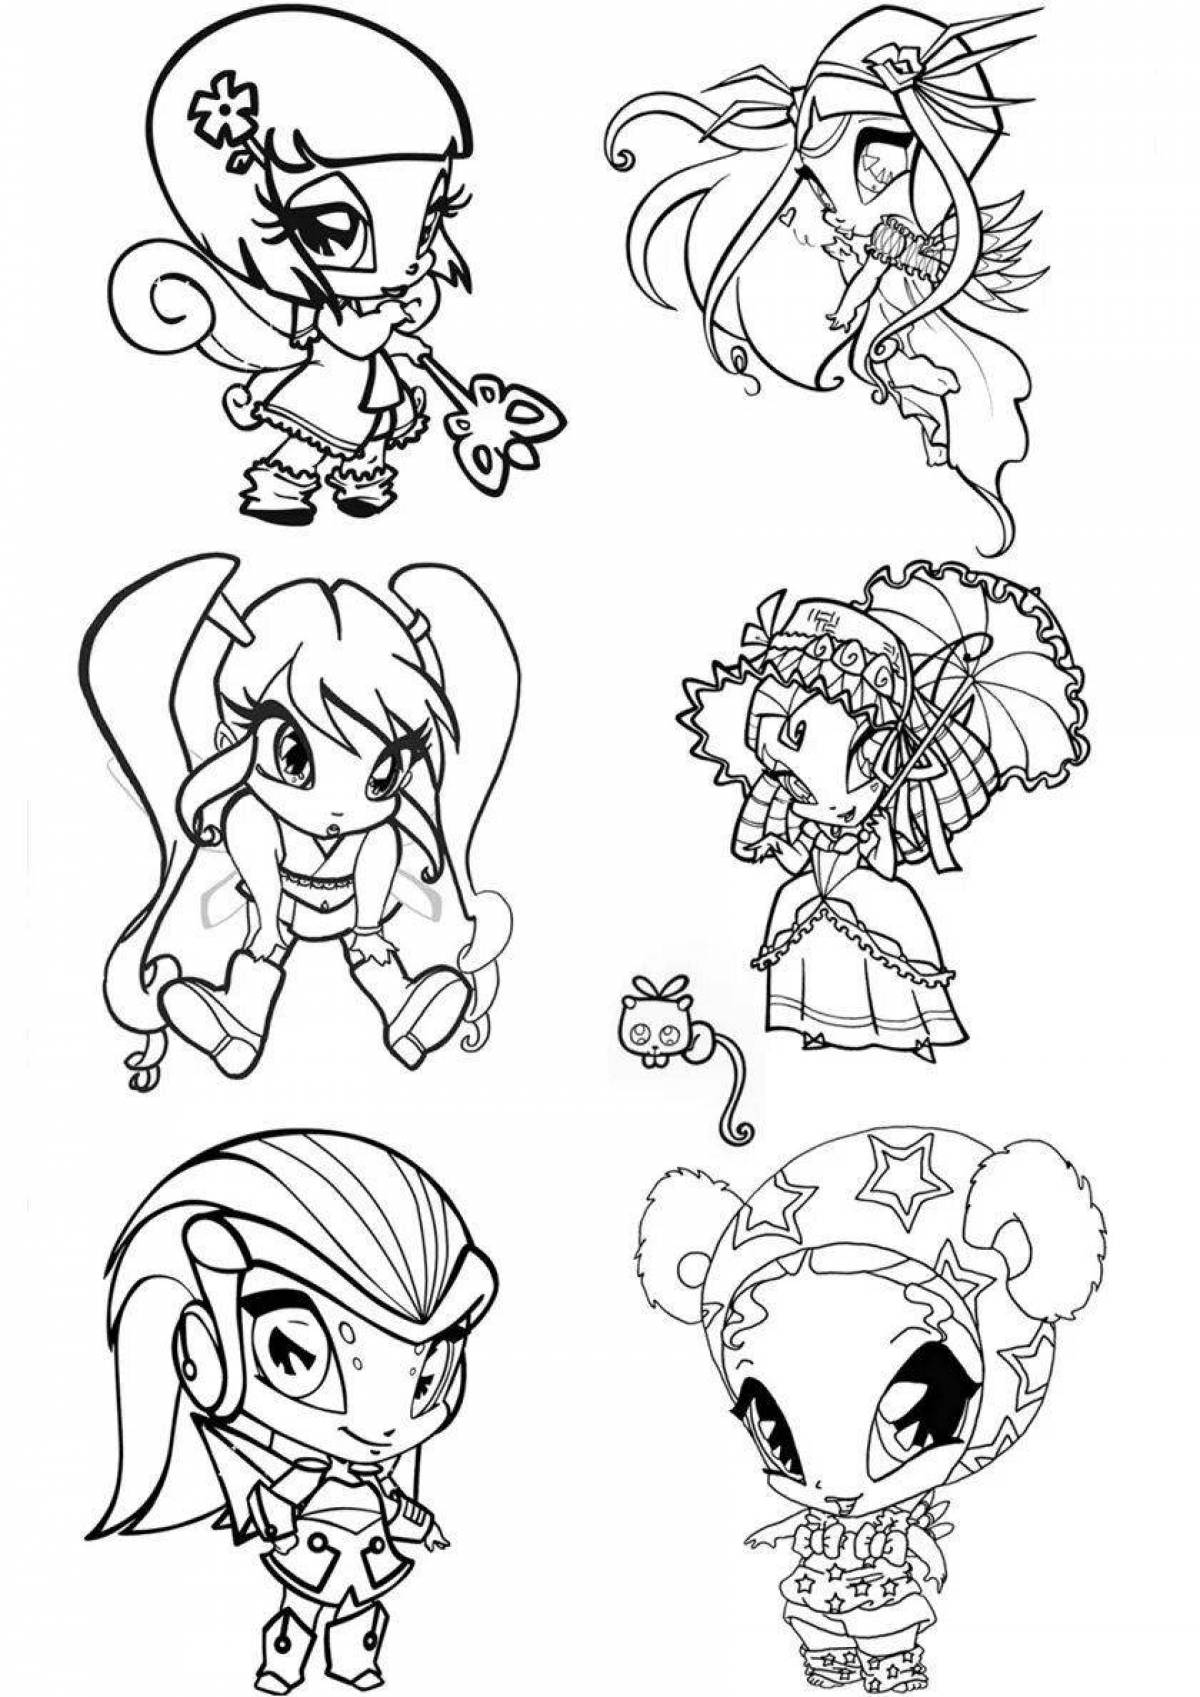 Winx pets live coloring page